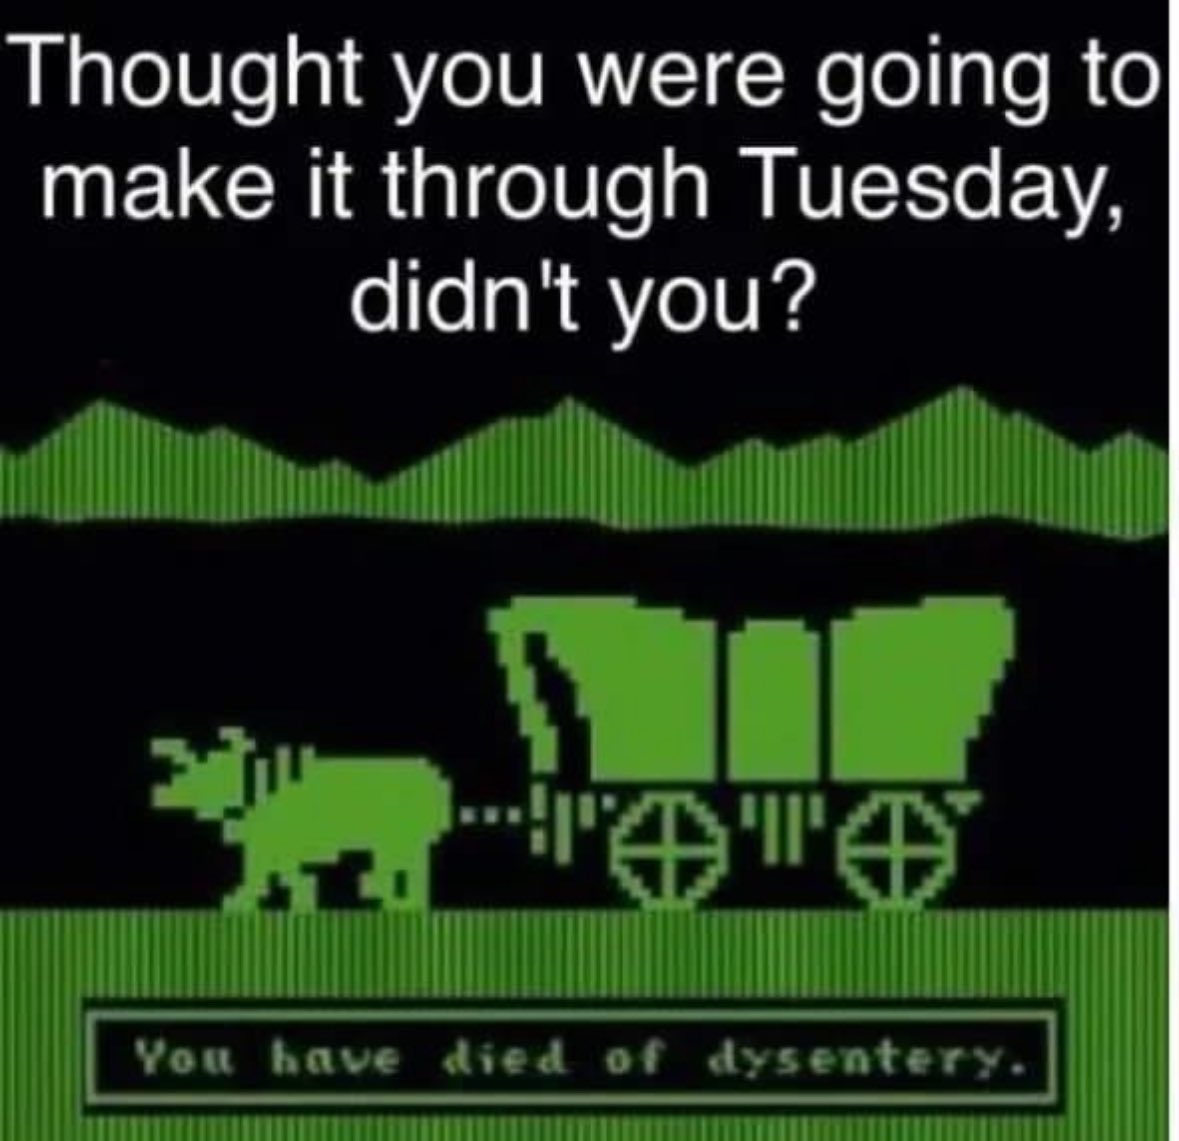 #YouGuys!! #Haha #ForReal

#LOL #OregonTrail #DadLife #Game #Life #Stress #Dysentery #Food #Eat #Computer #OldSchool